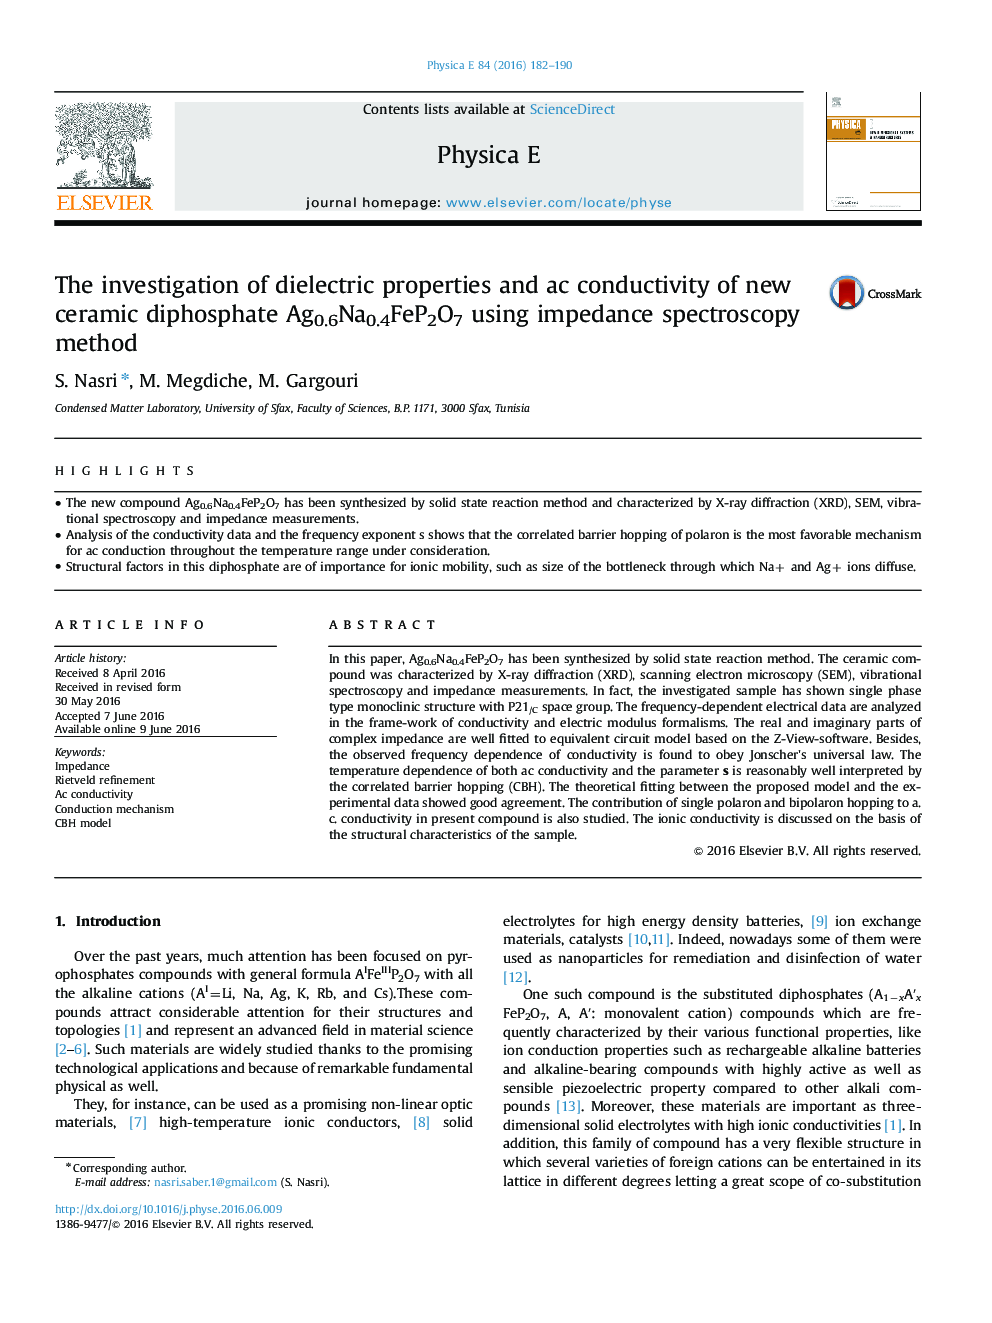 The investigation of dielectric properties and ac conductivity of new ceramic diphosphate Ag0.6Na0.4FeP2O7 using impedance spectroscopy method